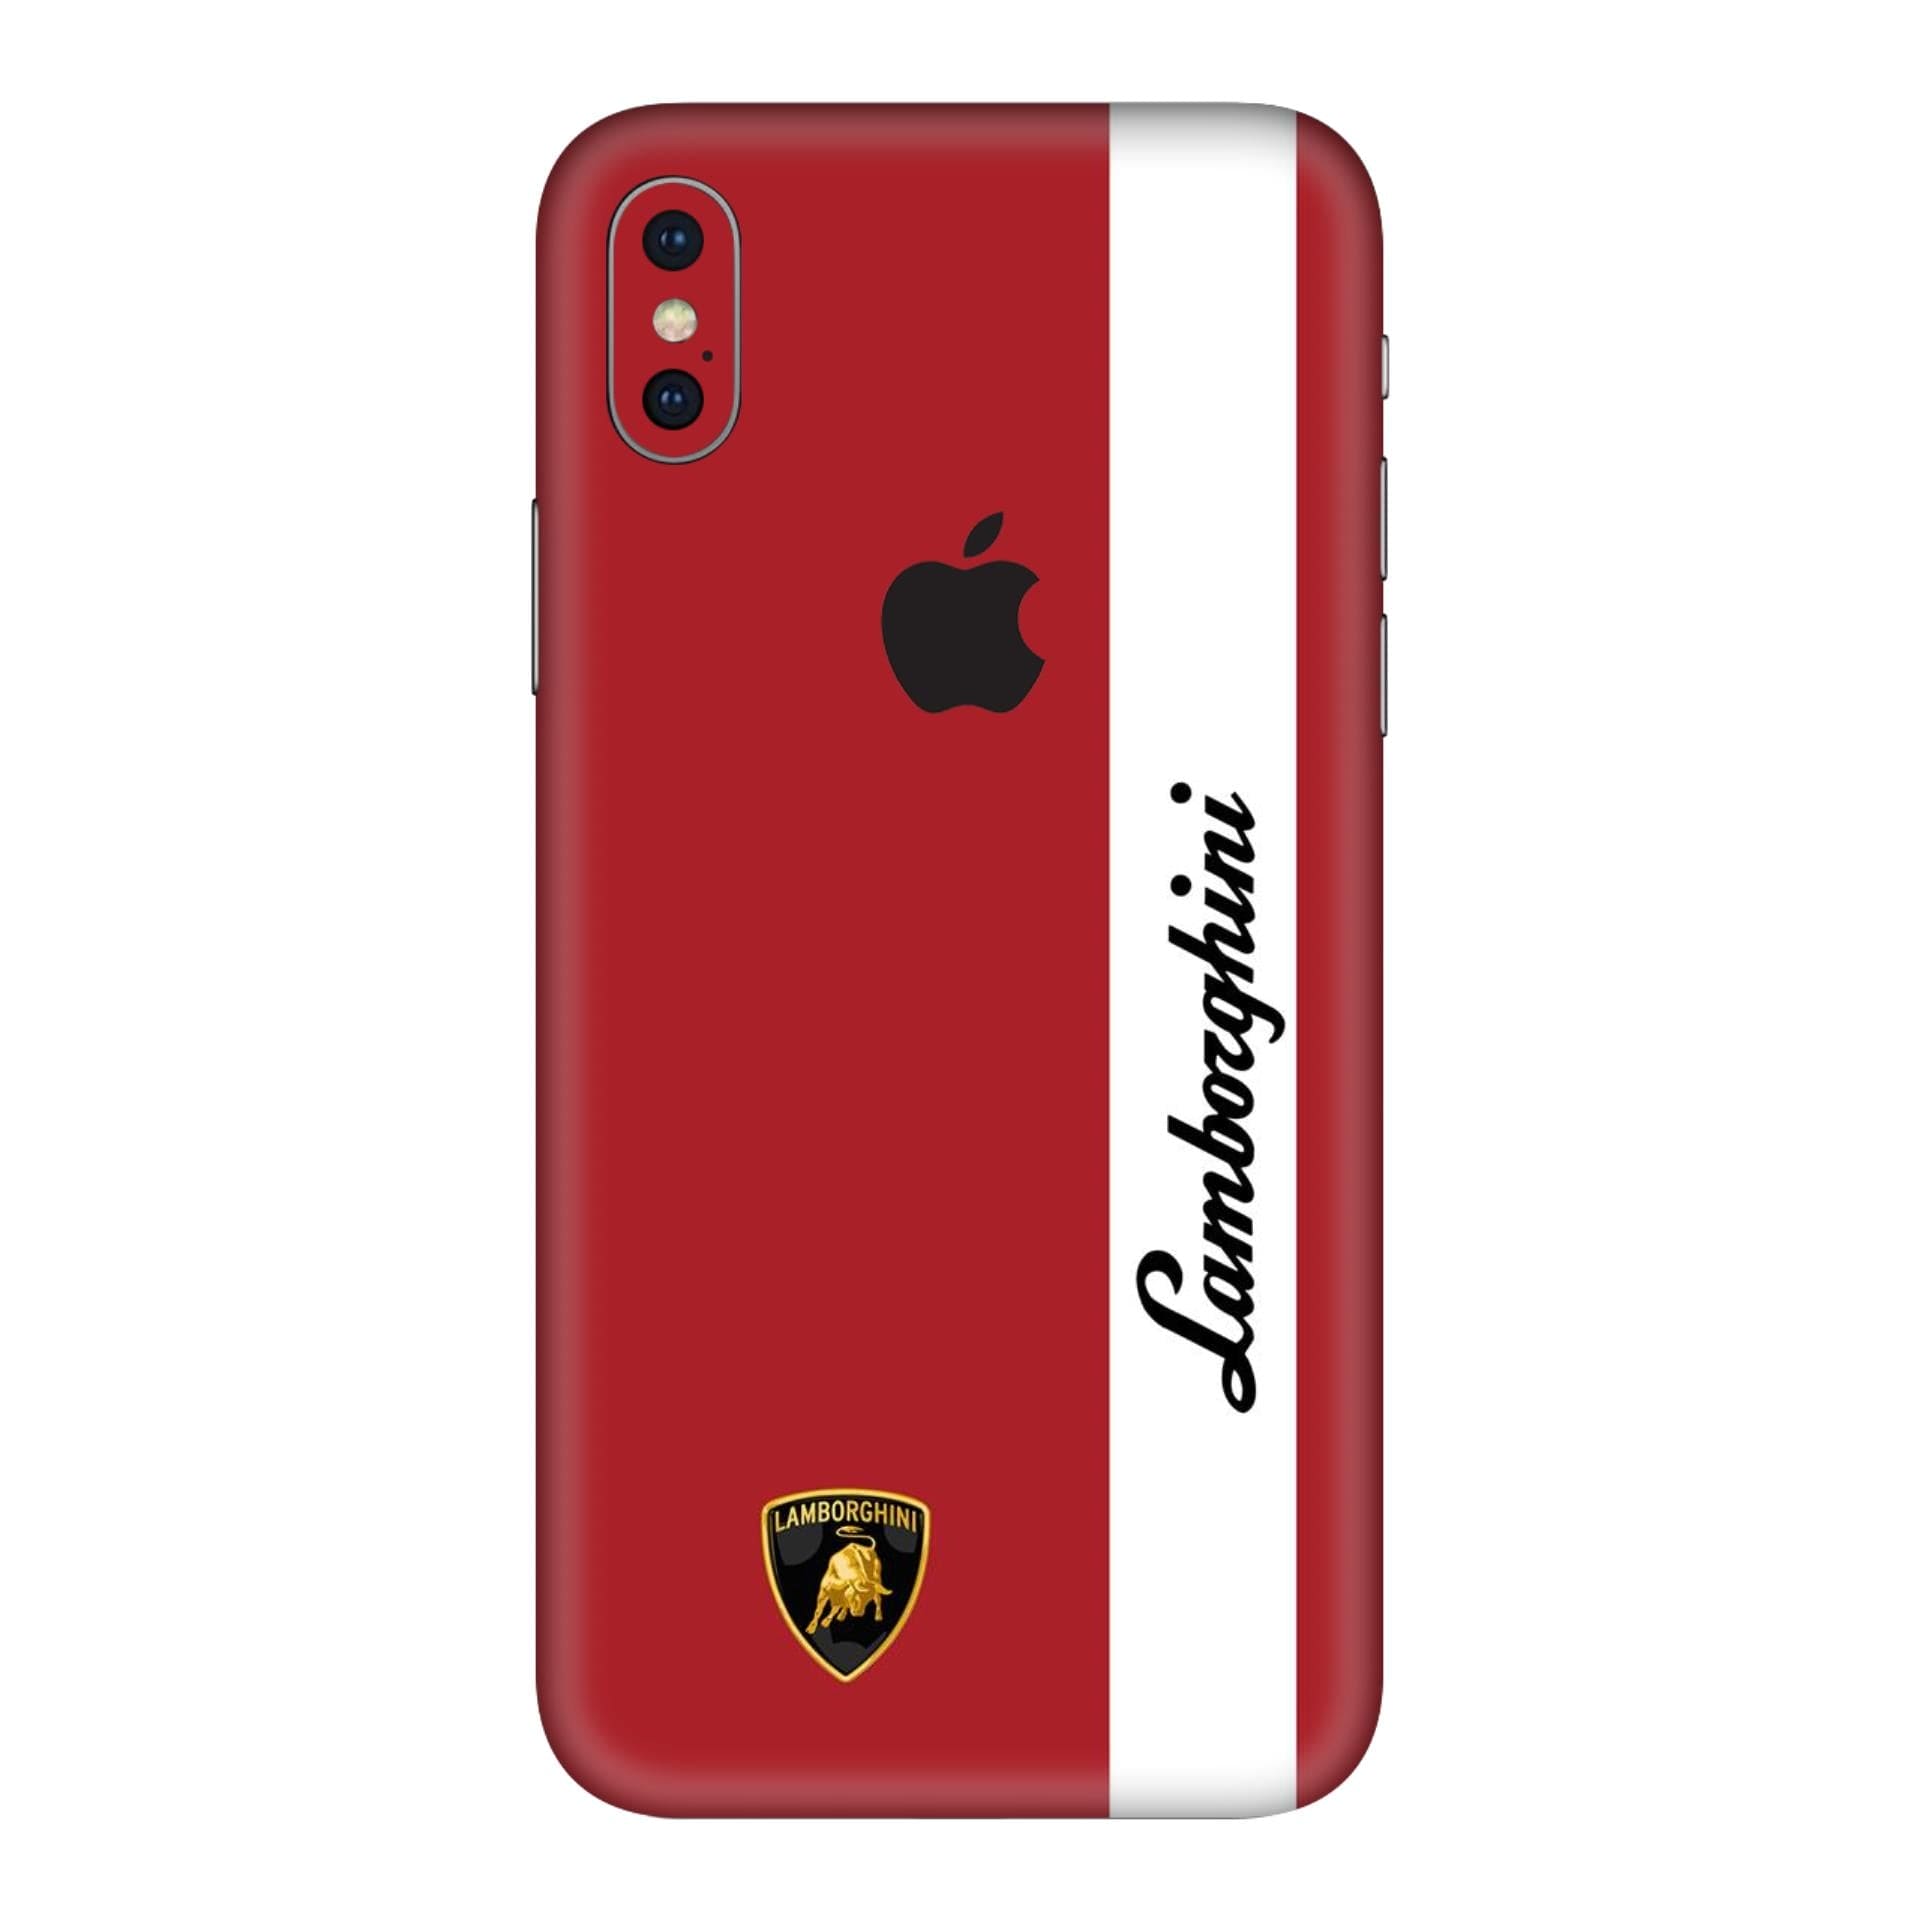 iphone XS Max Ruby Racer skins